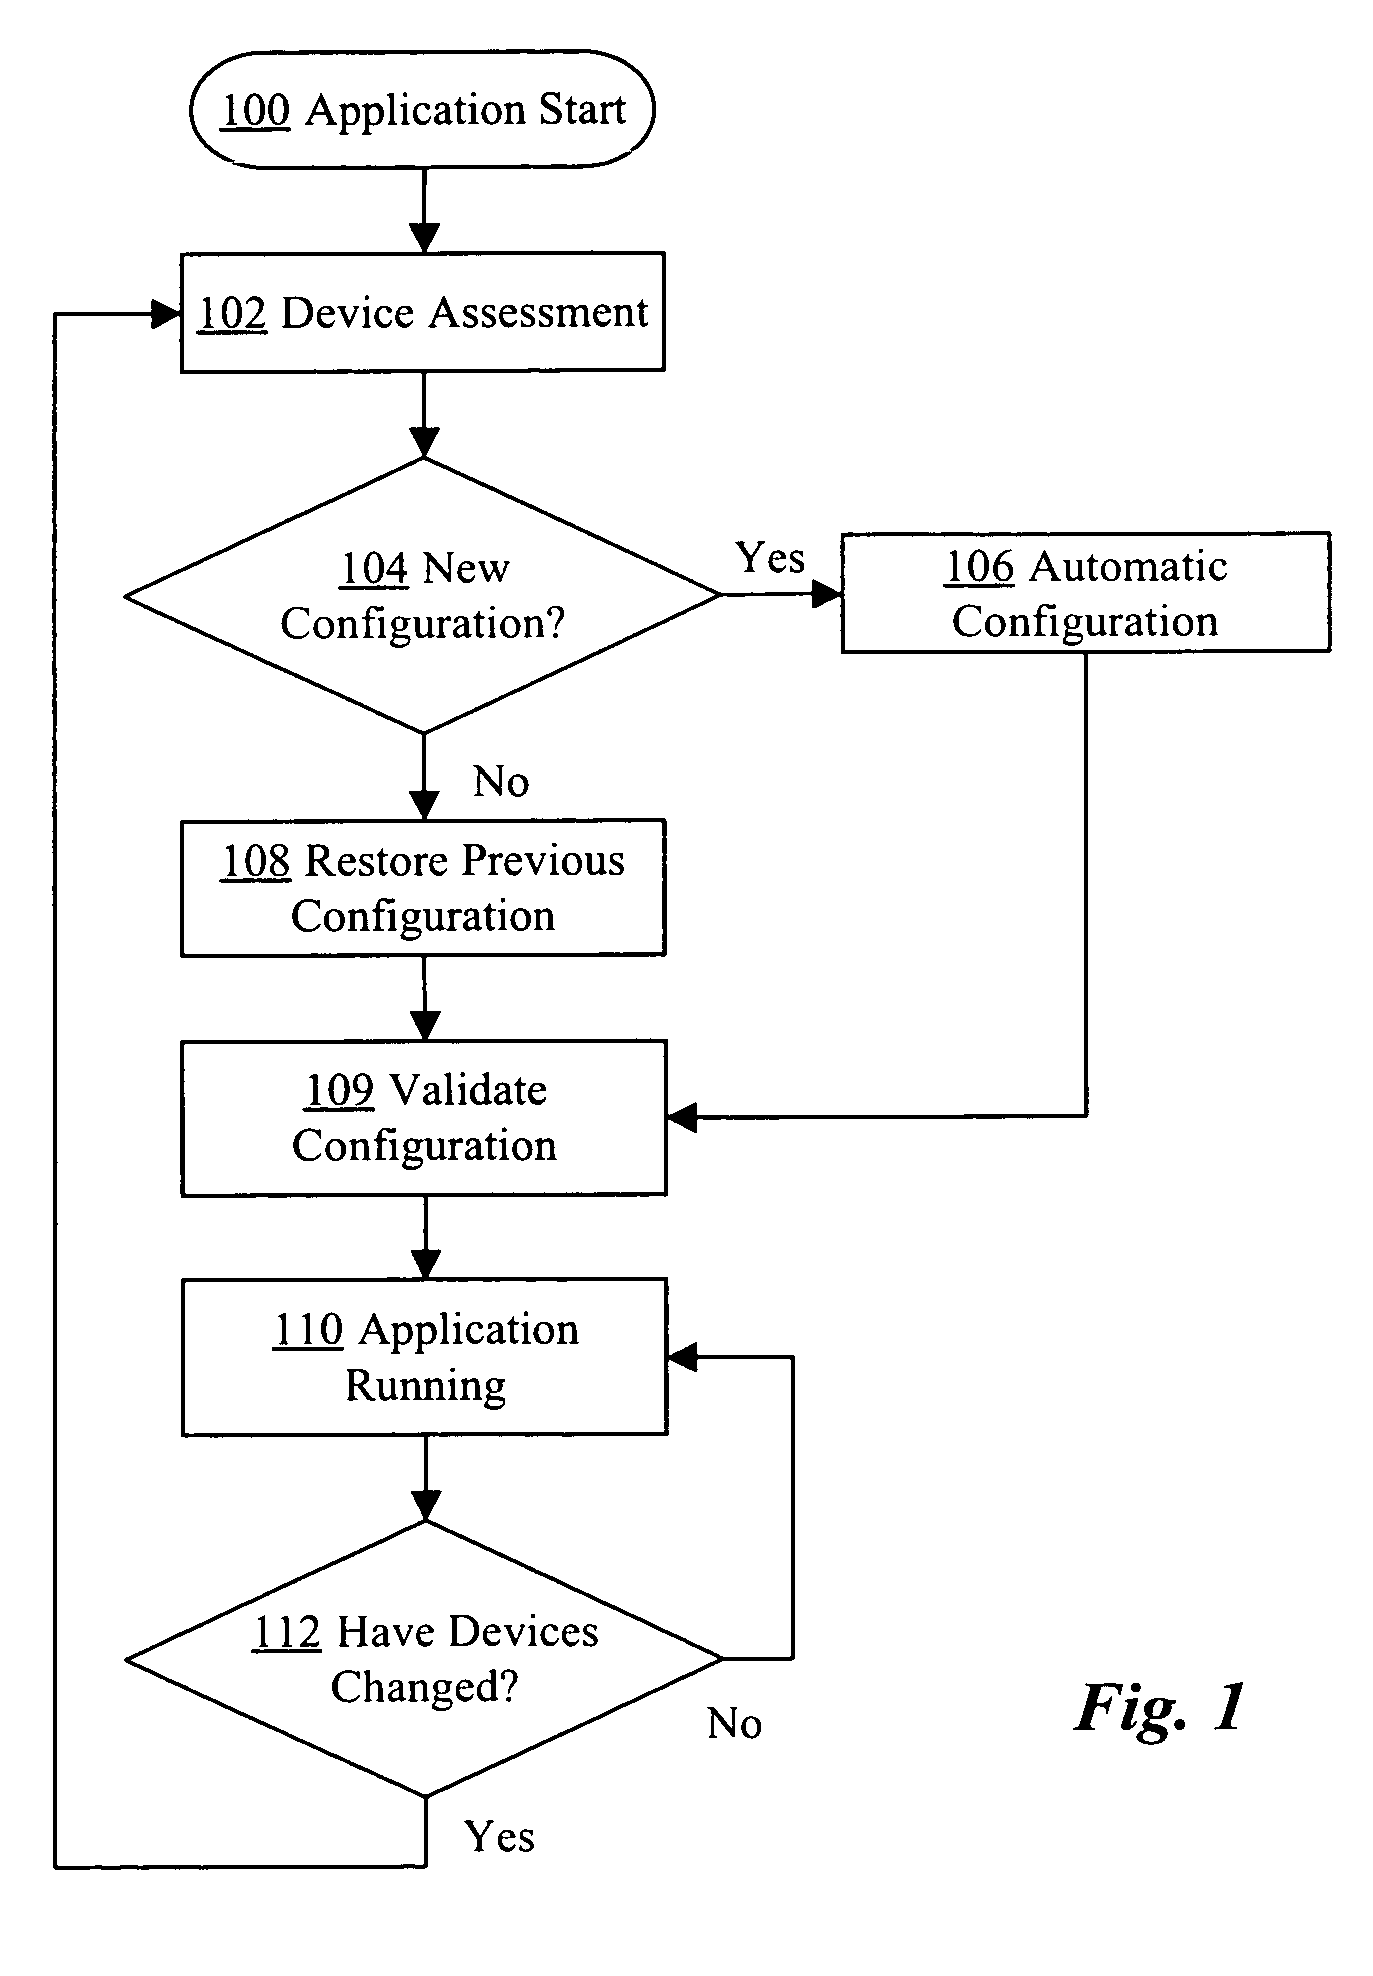 Automatic configuration of peripheral devices